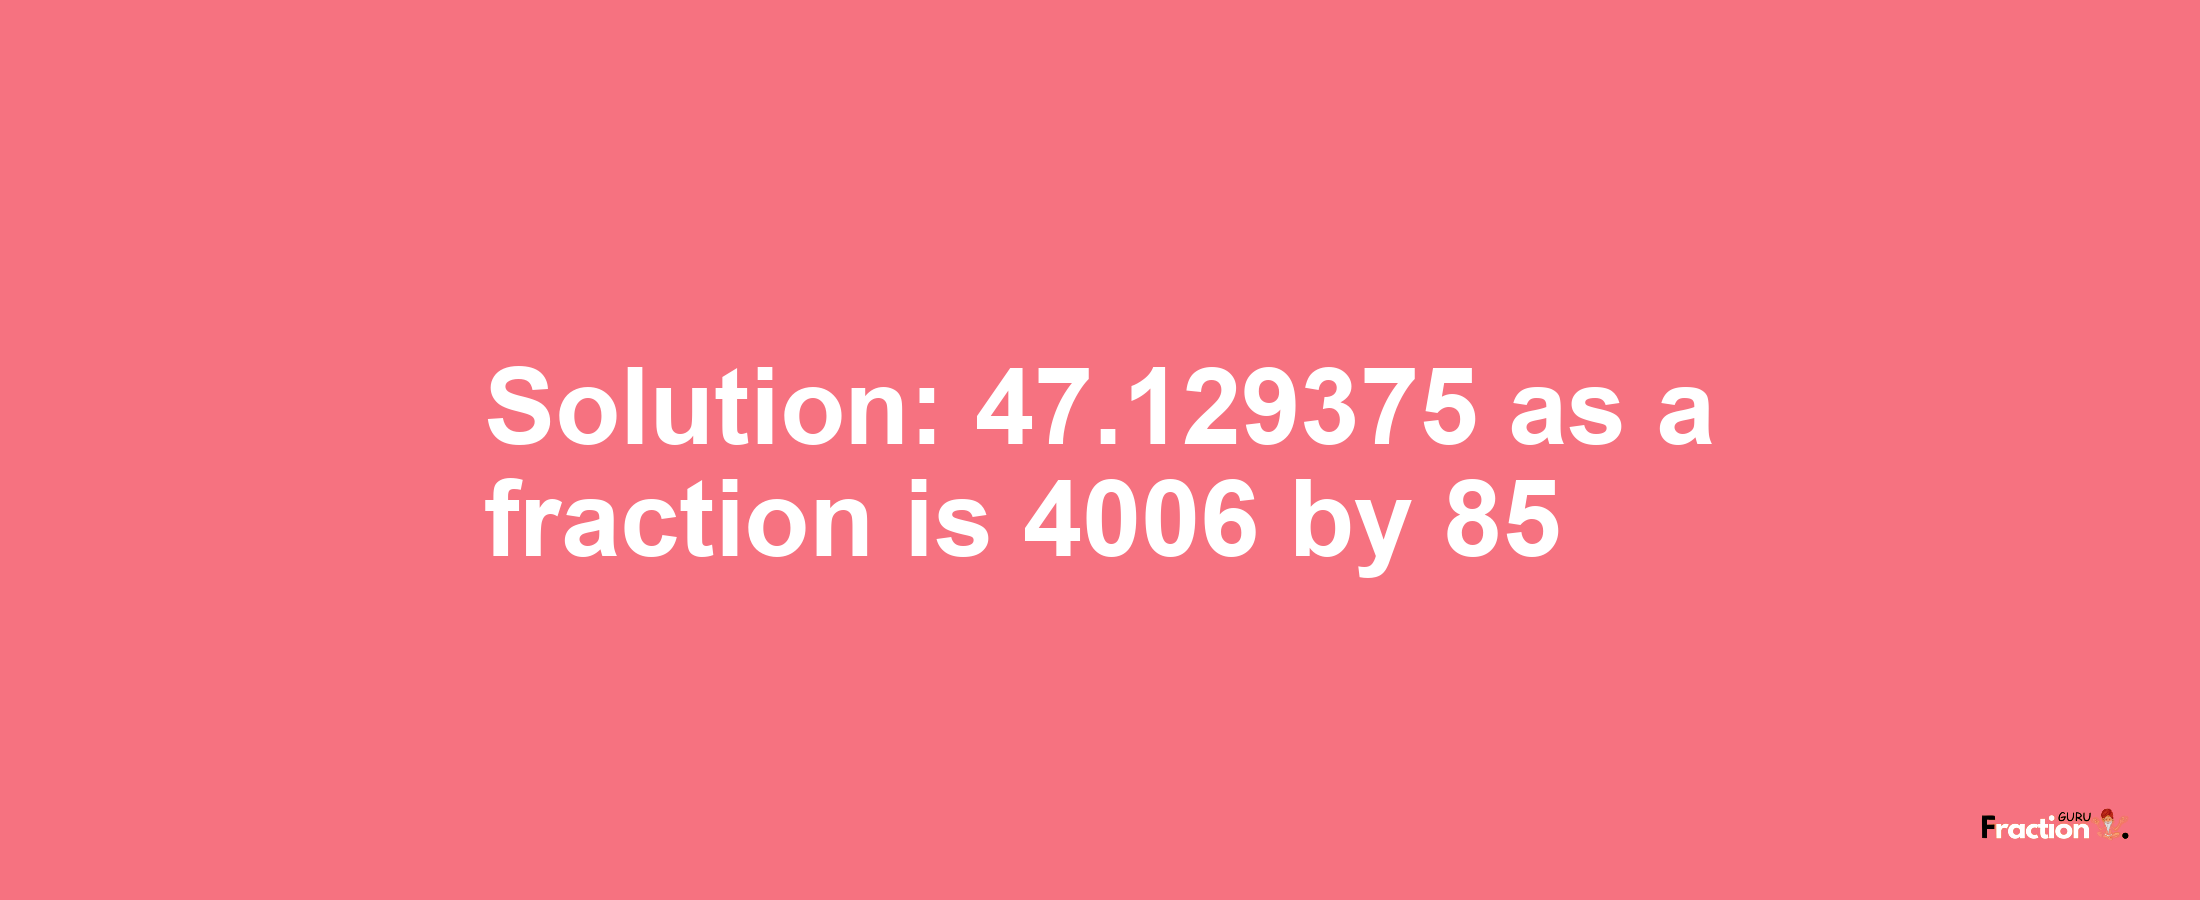 Solution:47.129375 as a fraction is 4006/85